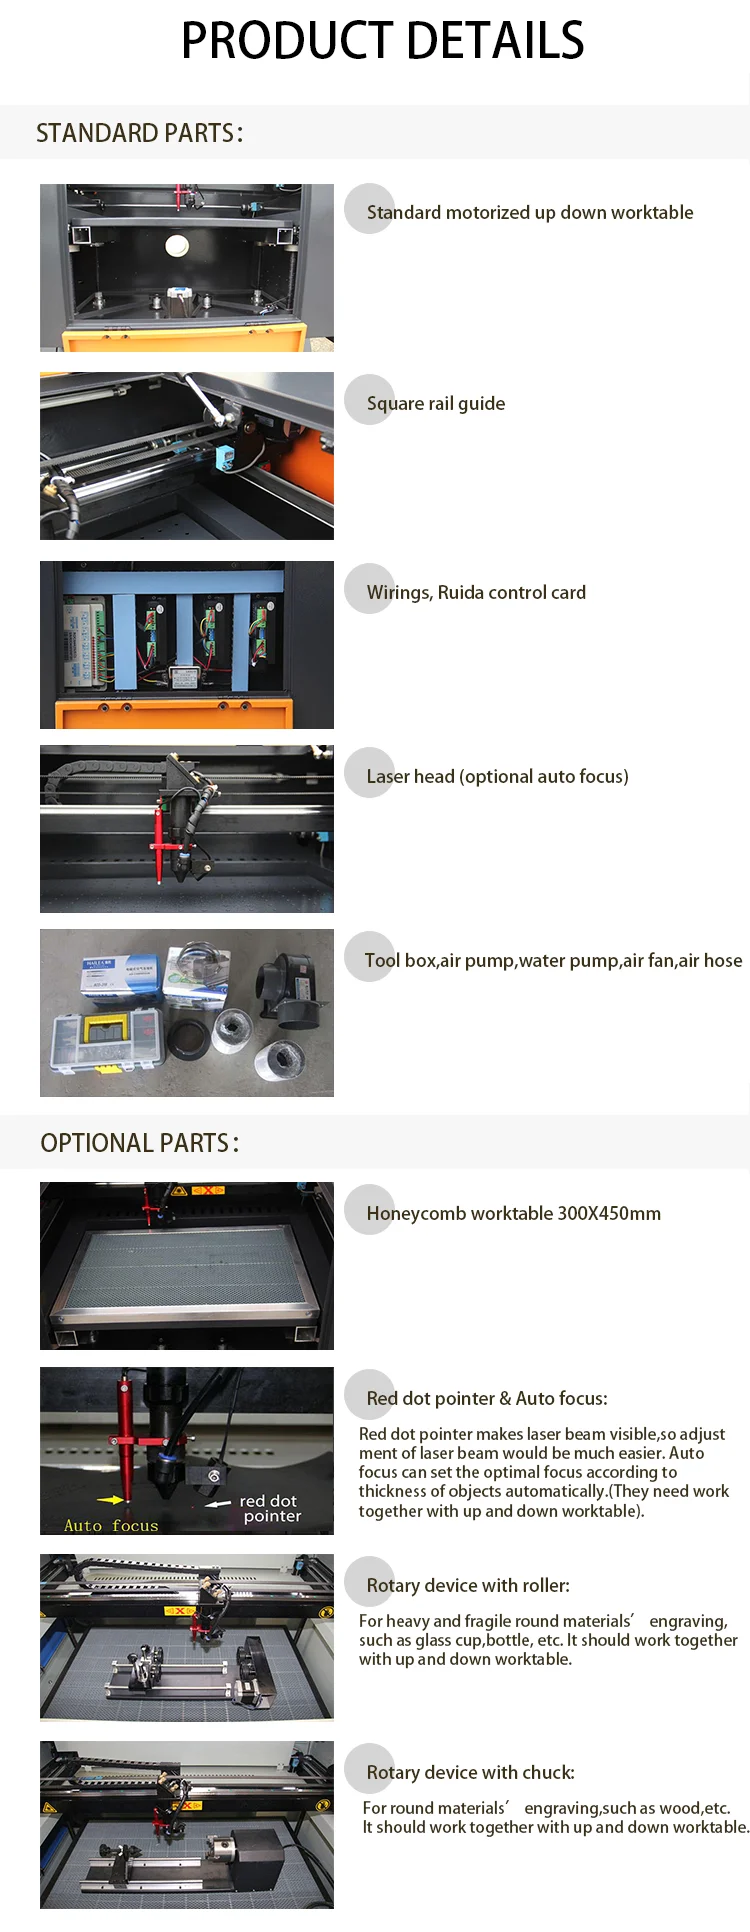 Mini 3050 Stencil Acrylic CO2 Laser Engraving And Cutting Machine For Sale